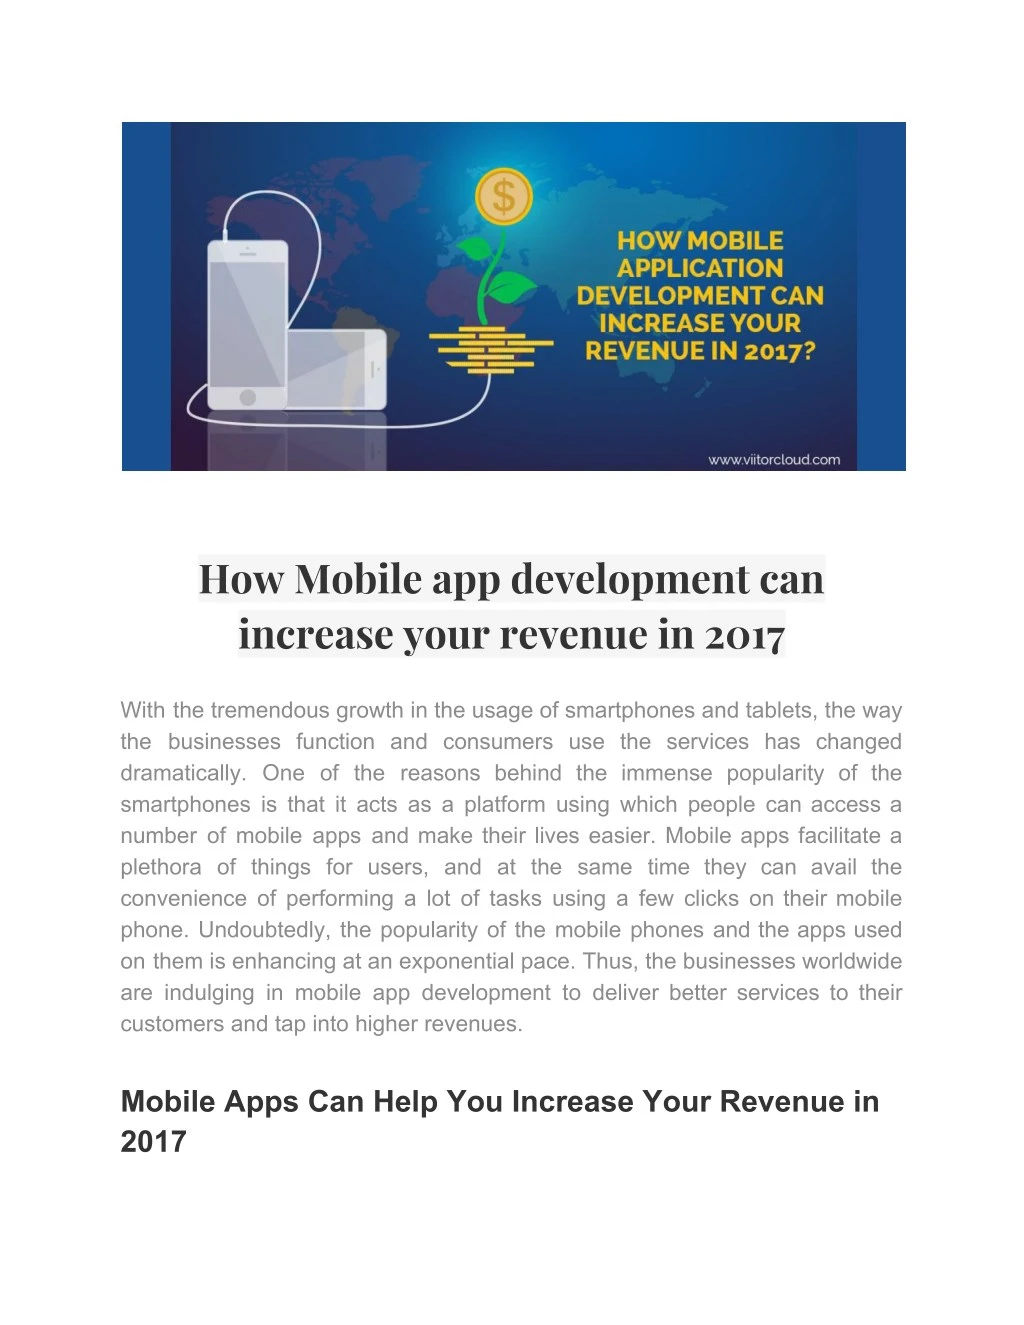 how mobile app development can increase your